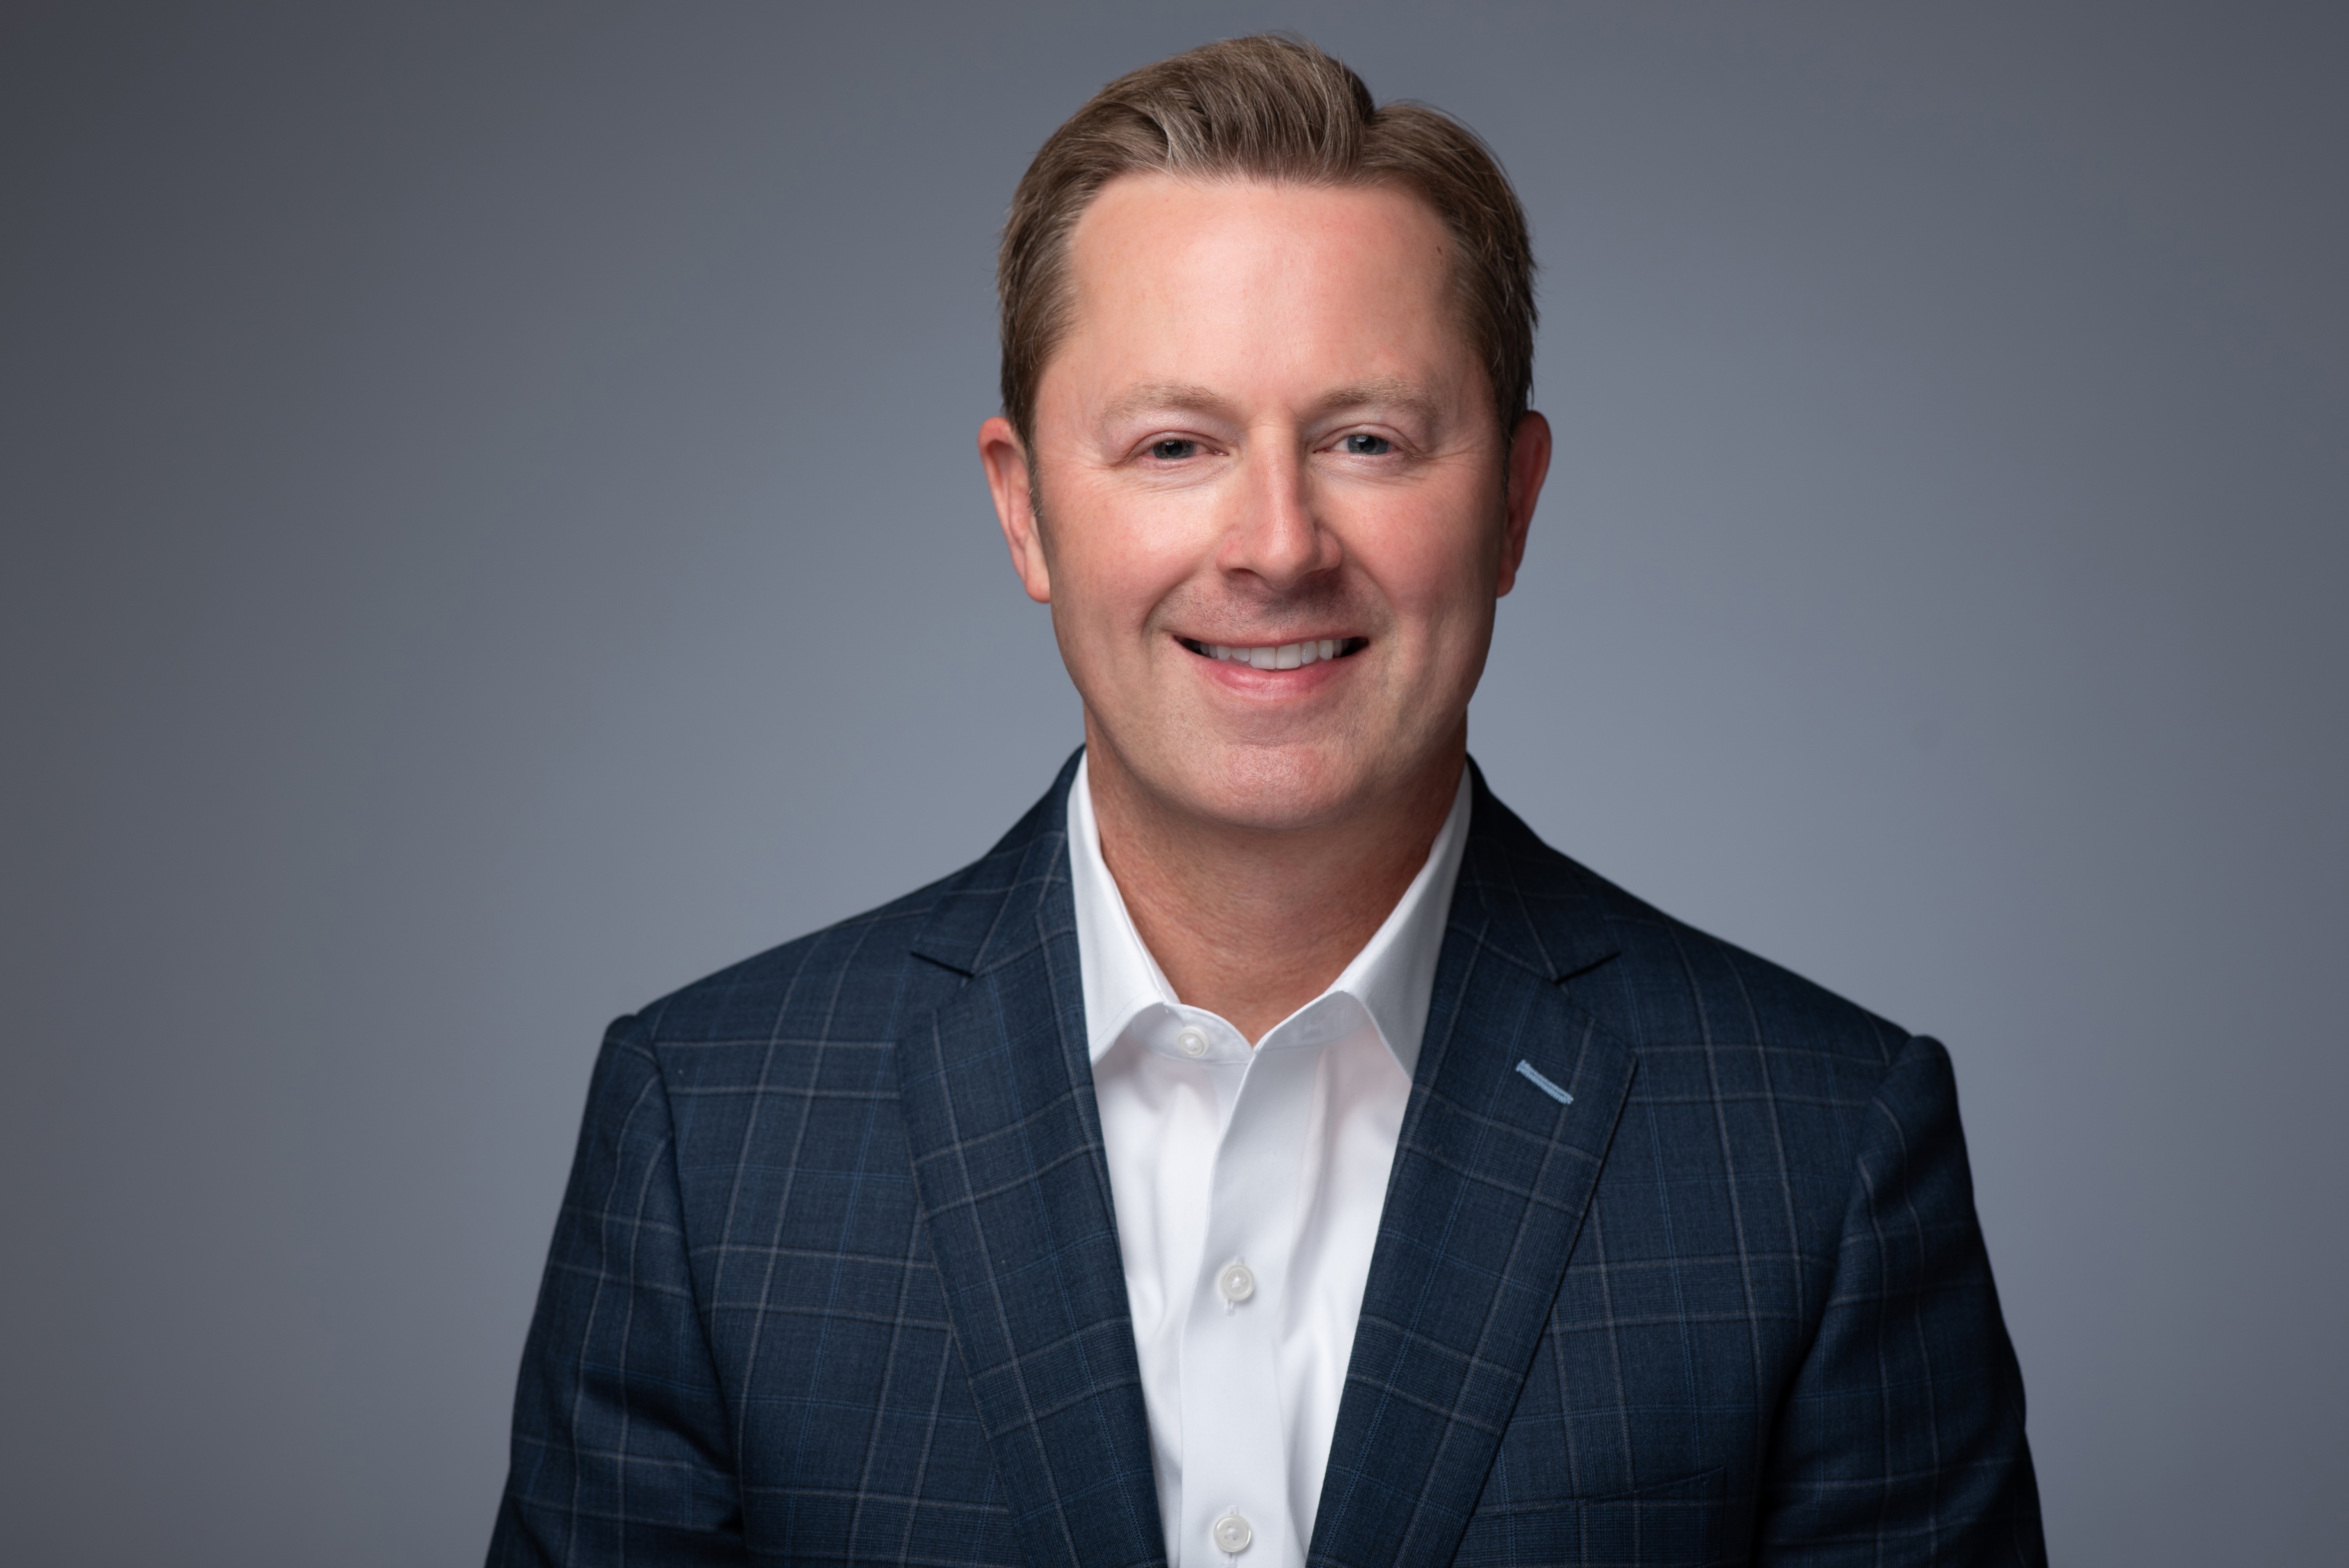 Sodexo, a leader in healthcare food service and facilities management, announced today the appointment of David Gillan as the new Chief of Strategy and Client Retention for Sodexo U.S. Healthcare.